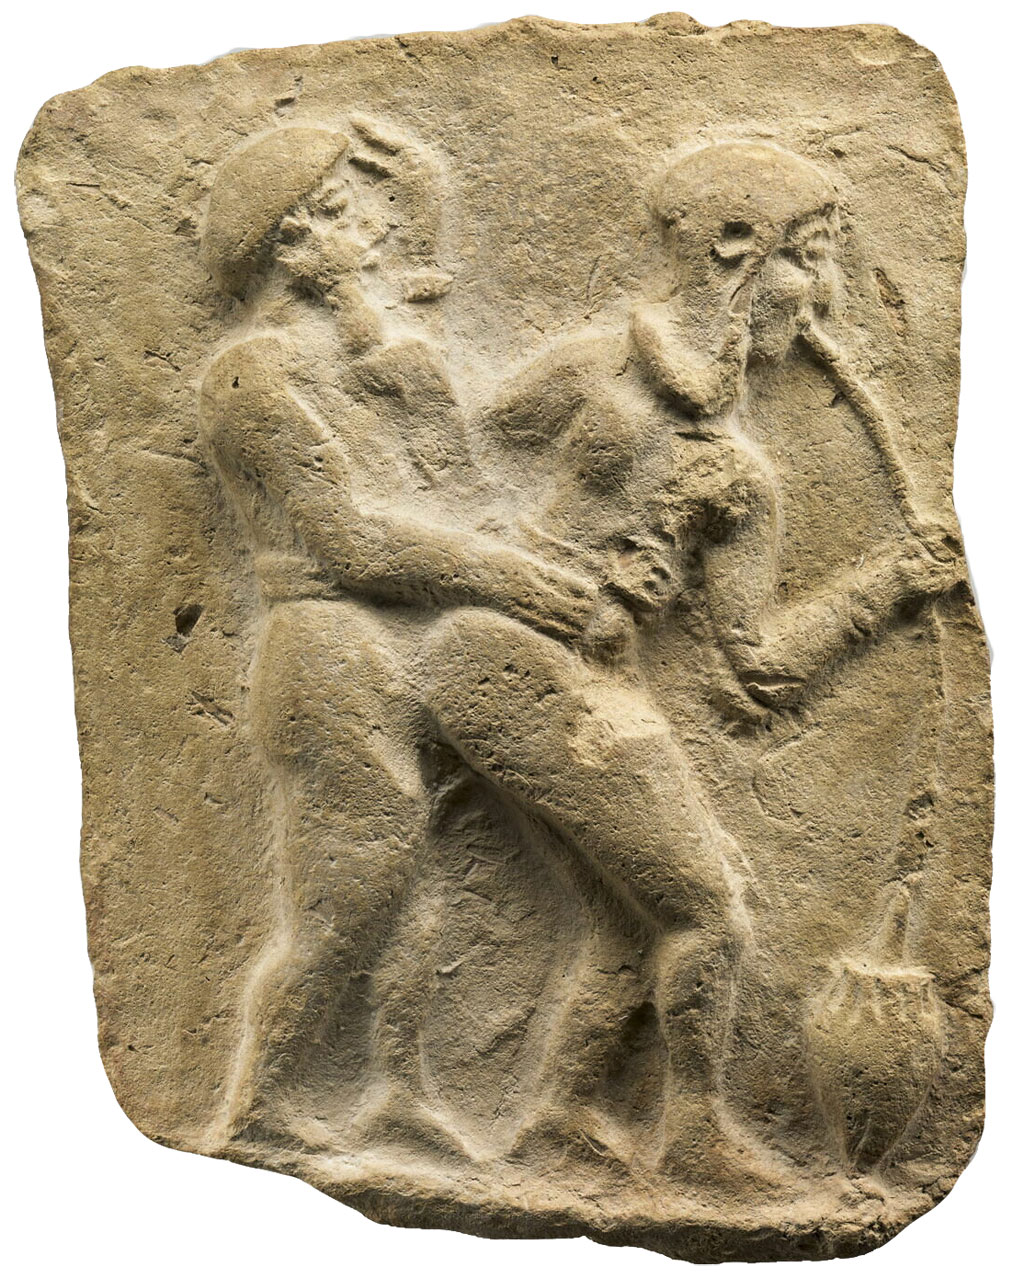 Old Babylonian plaque: man from behind sexually penetrating woman drinking beer. She affectionately strokes his face. 